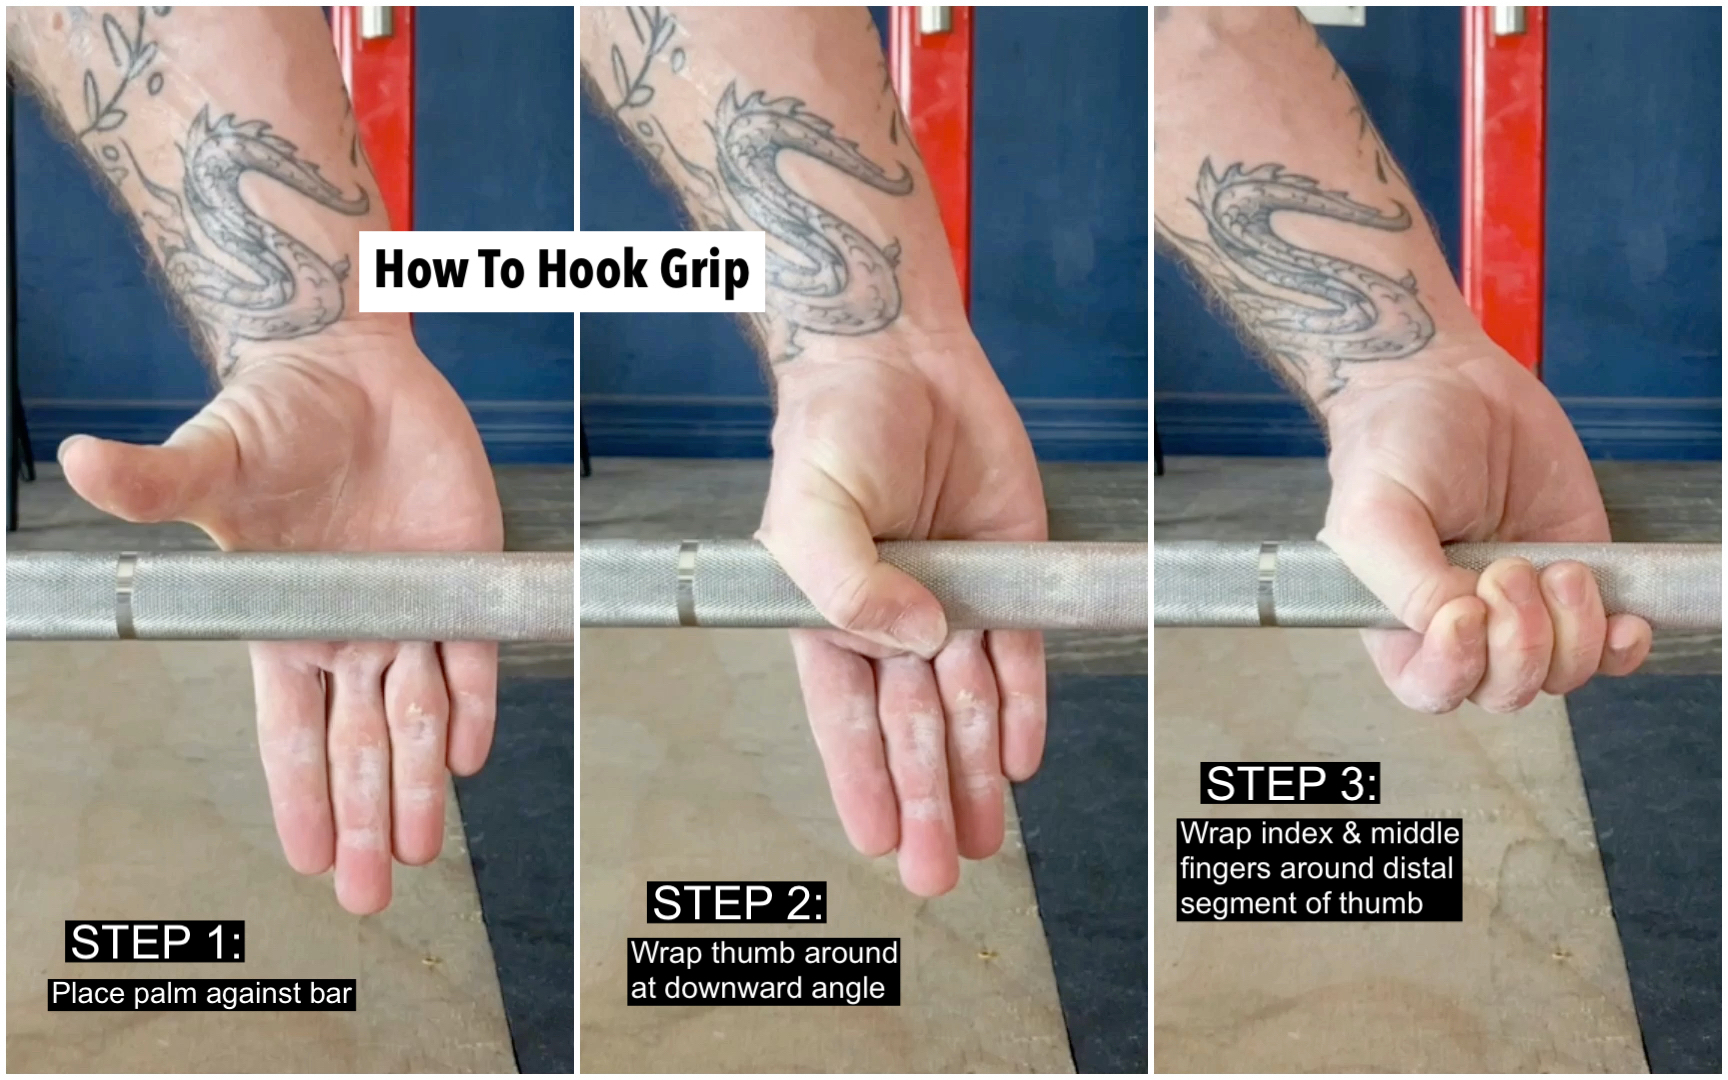 How to Use Weight Lifting Hook Grips, Complete Guide to Using Weightlifting  Hooks